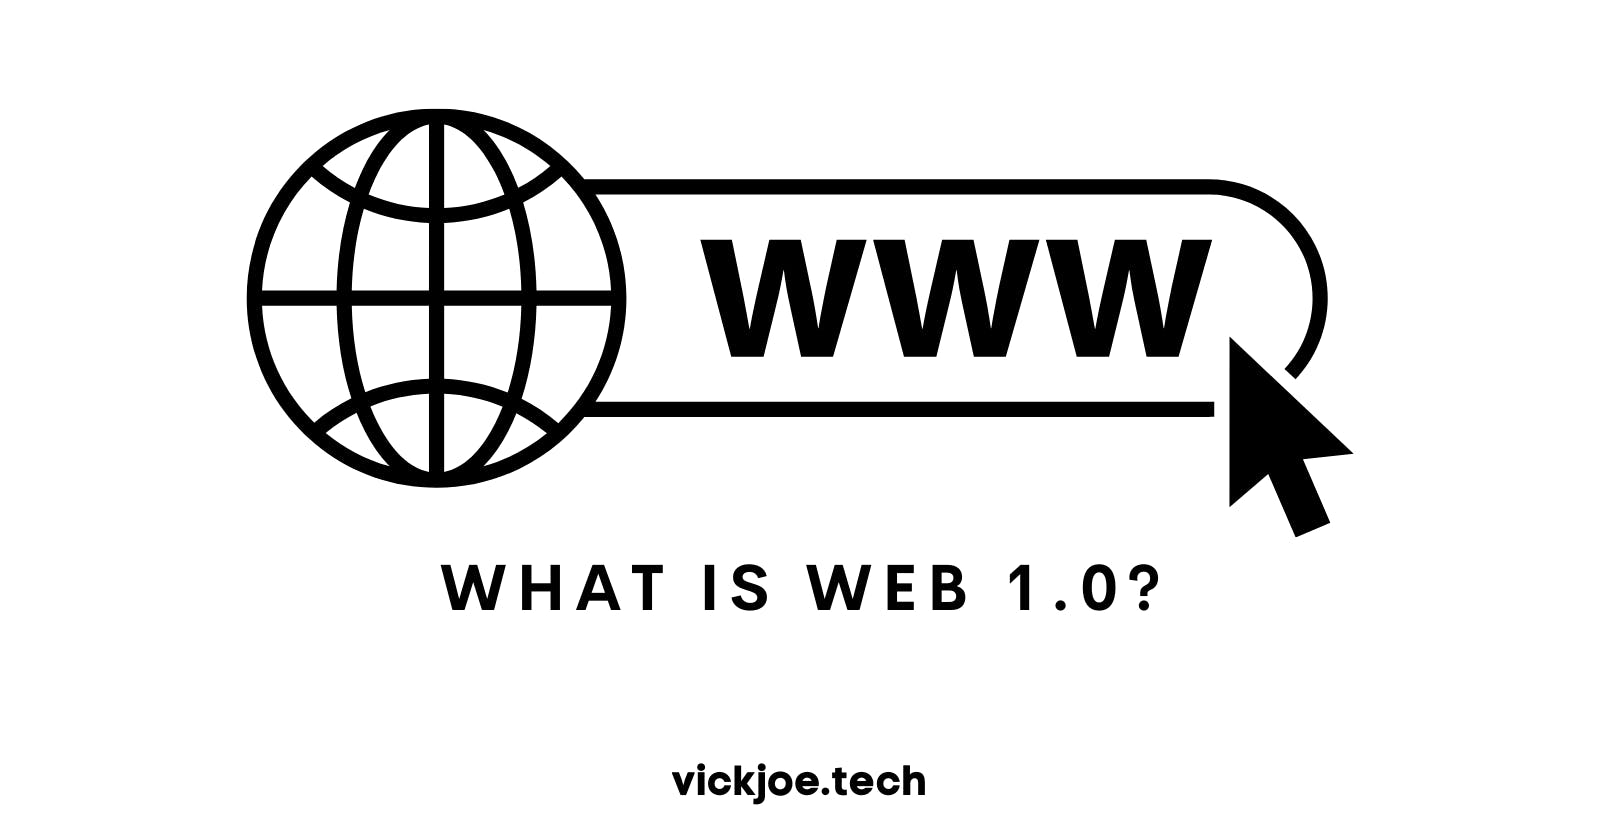 What is Web 1.0?